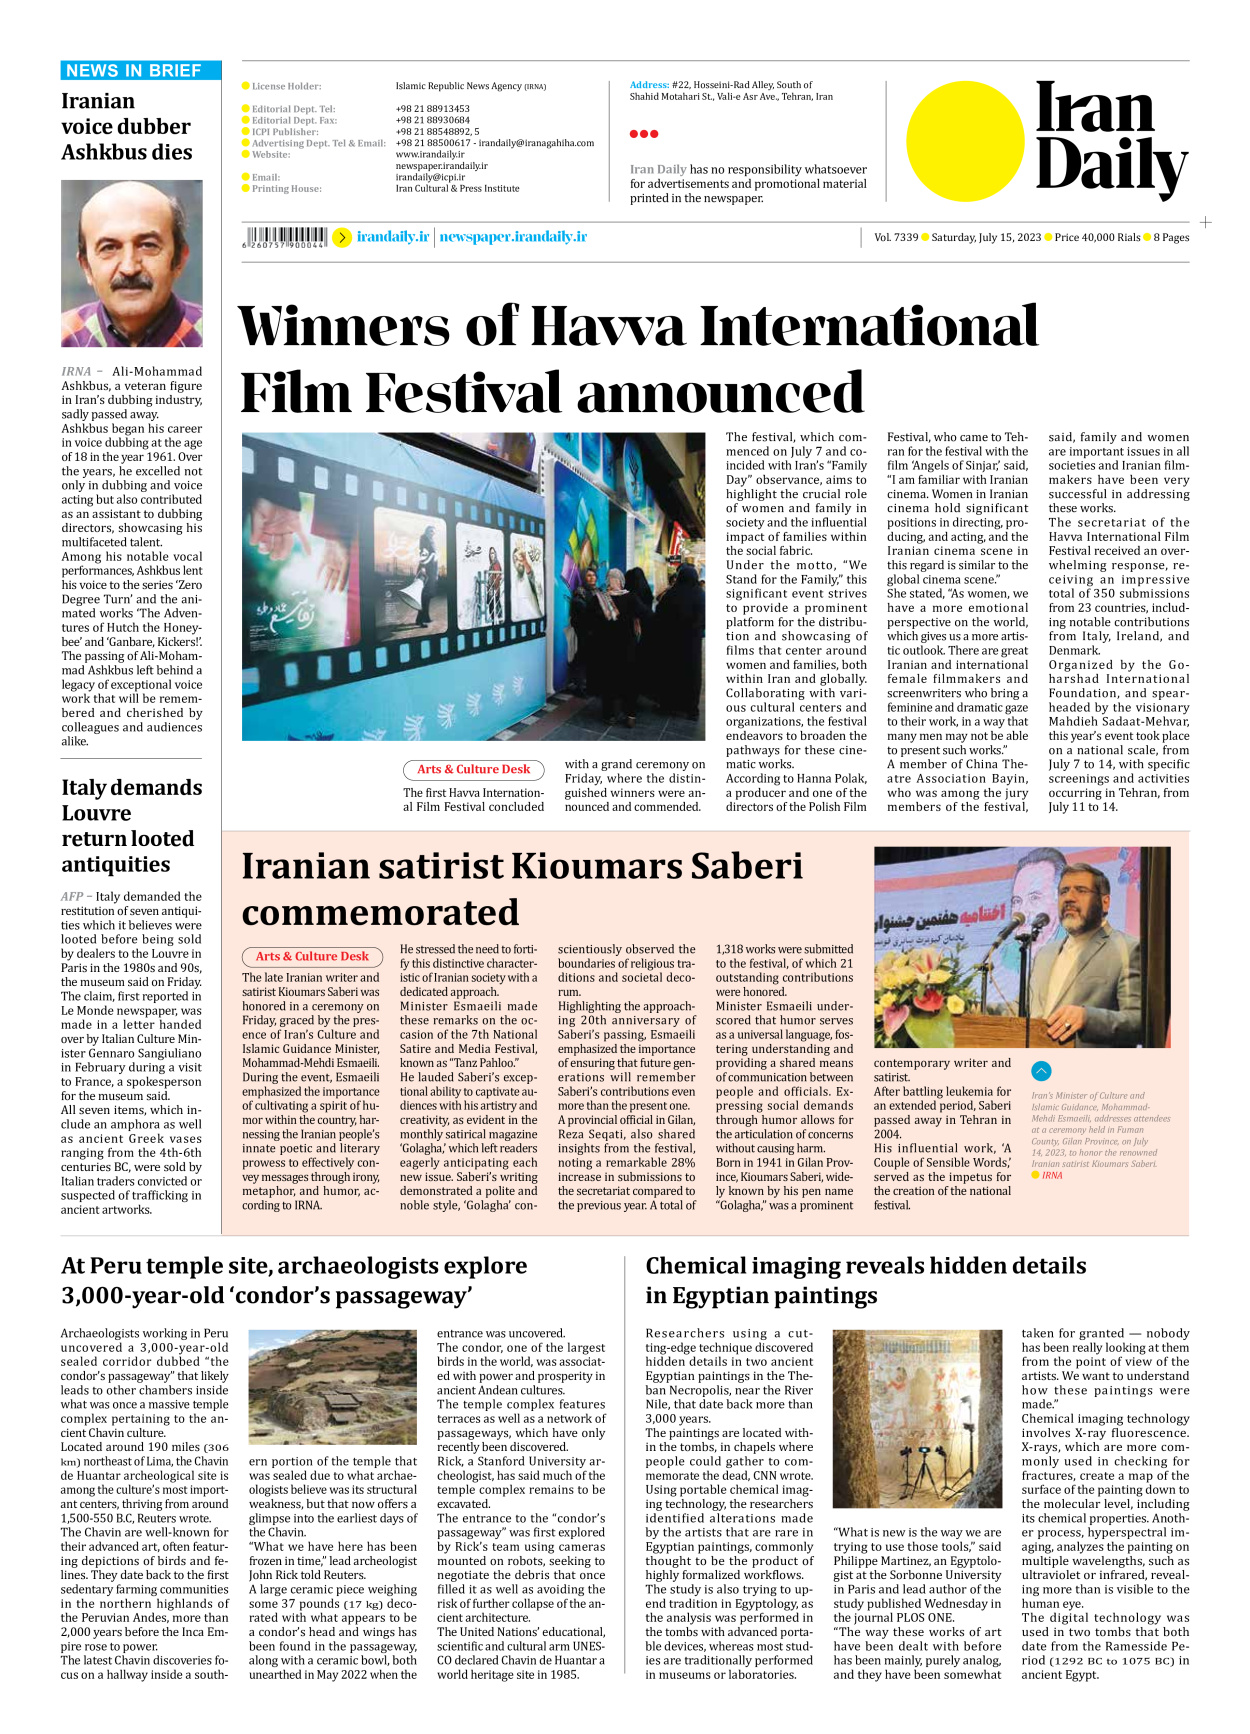 Iran Daily - Number Seven Thousand Three Hundred and Thirty Nine - 15 July 2023 - Page 8